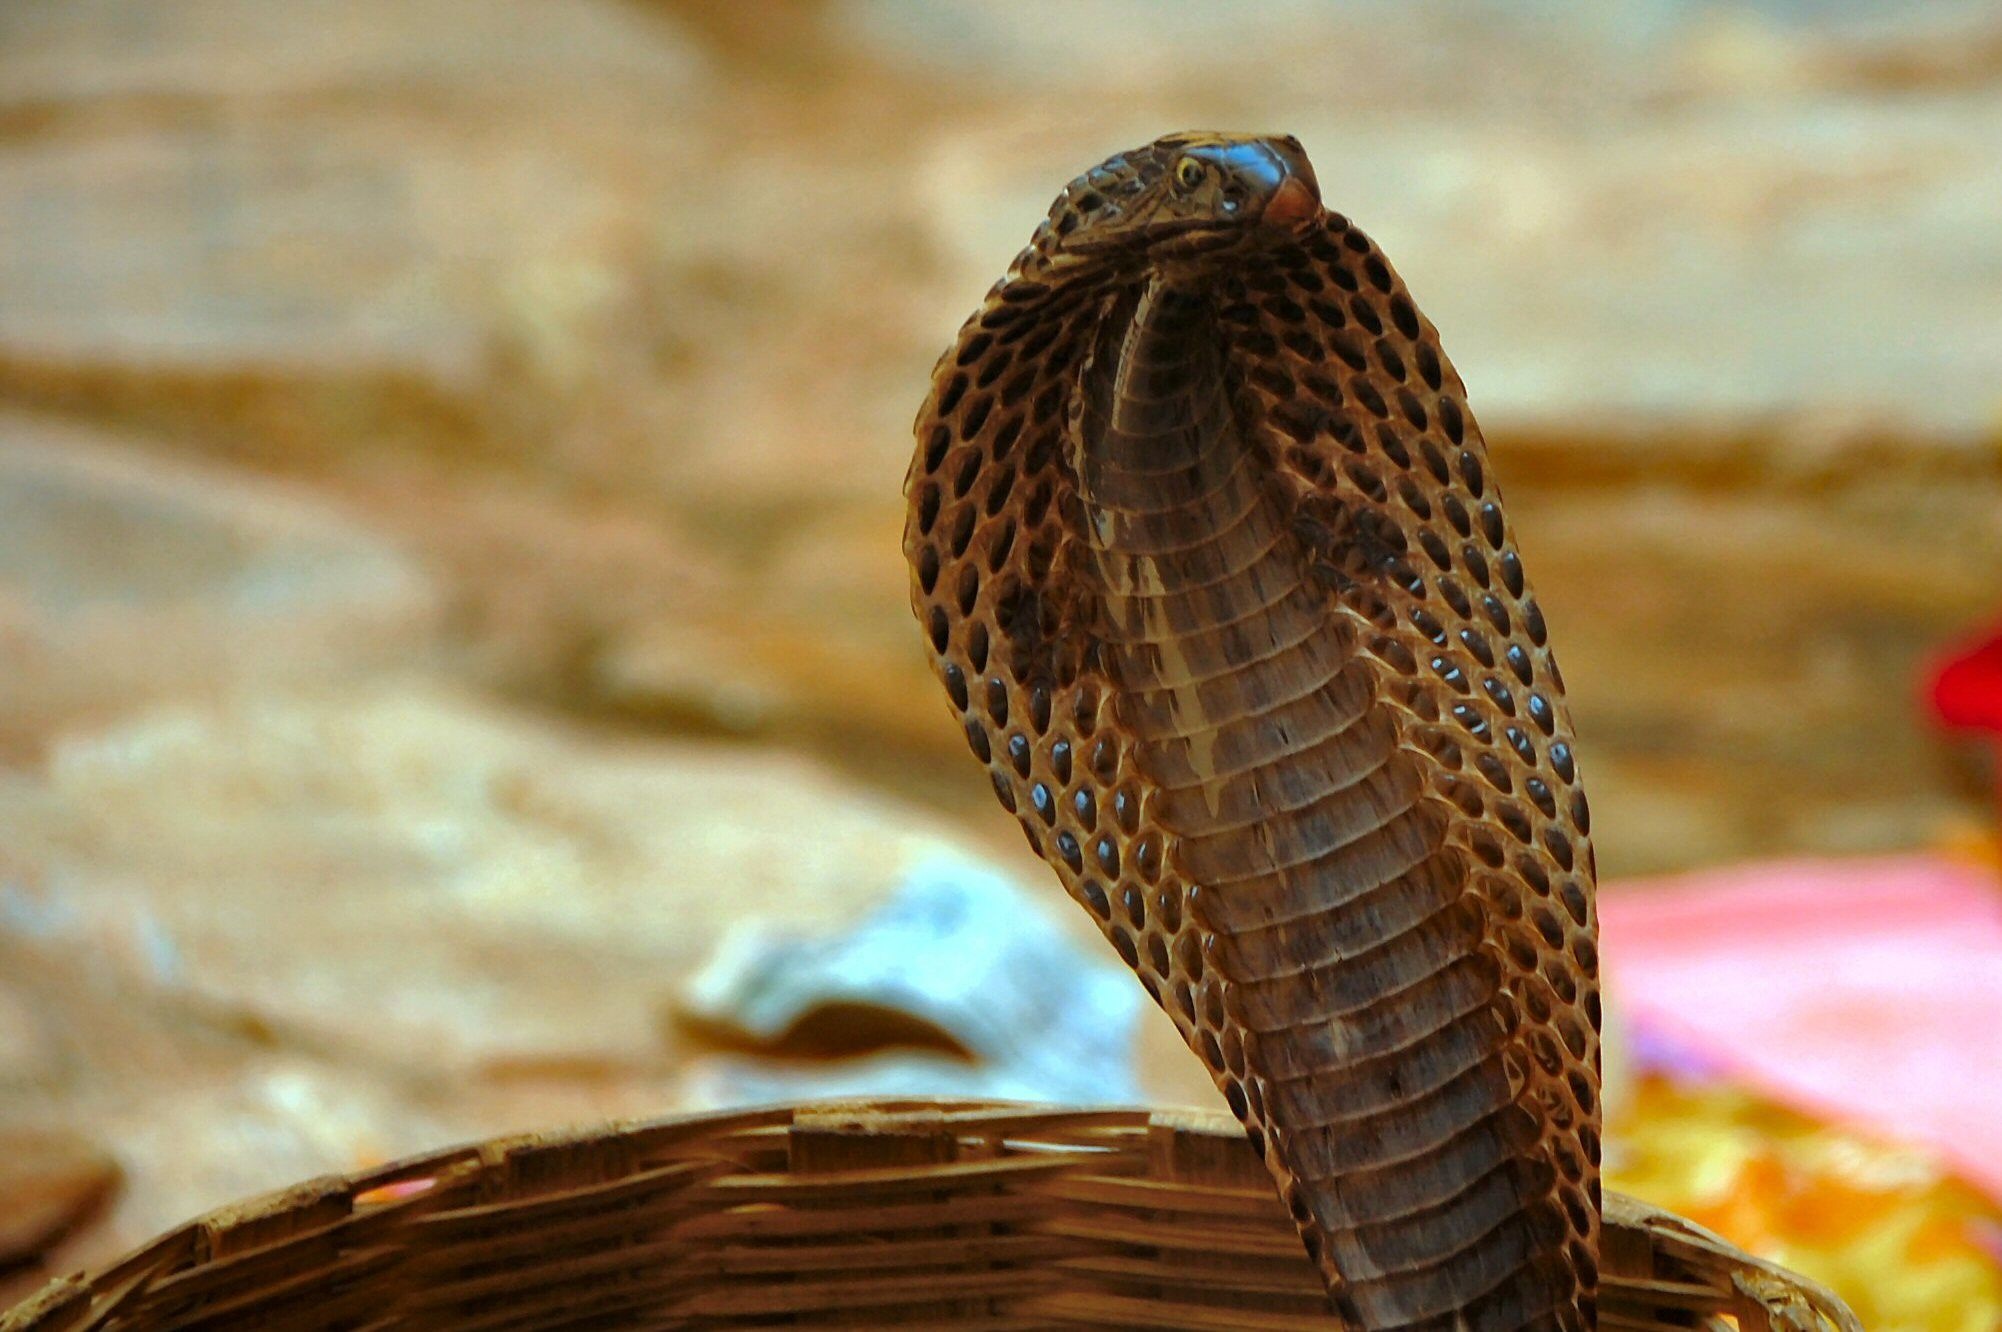 Cobra deadly charm, Nature's fearsome creatures, Animal kingdom marvels, Captivating HD wallpapers, 2010x1340 HD Desktop